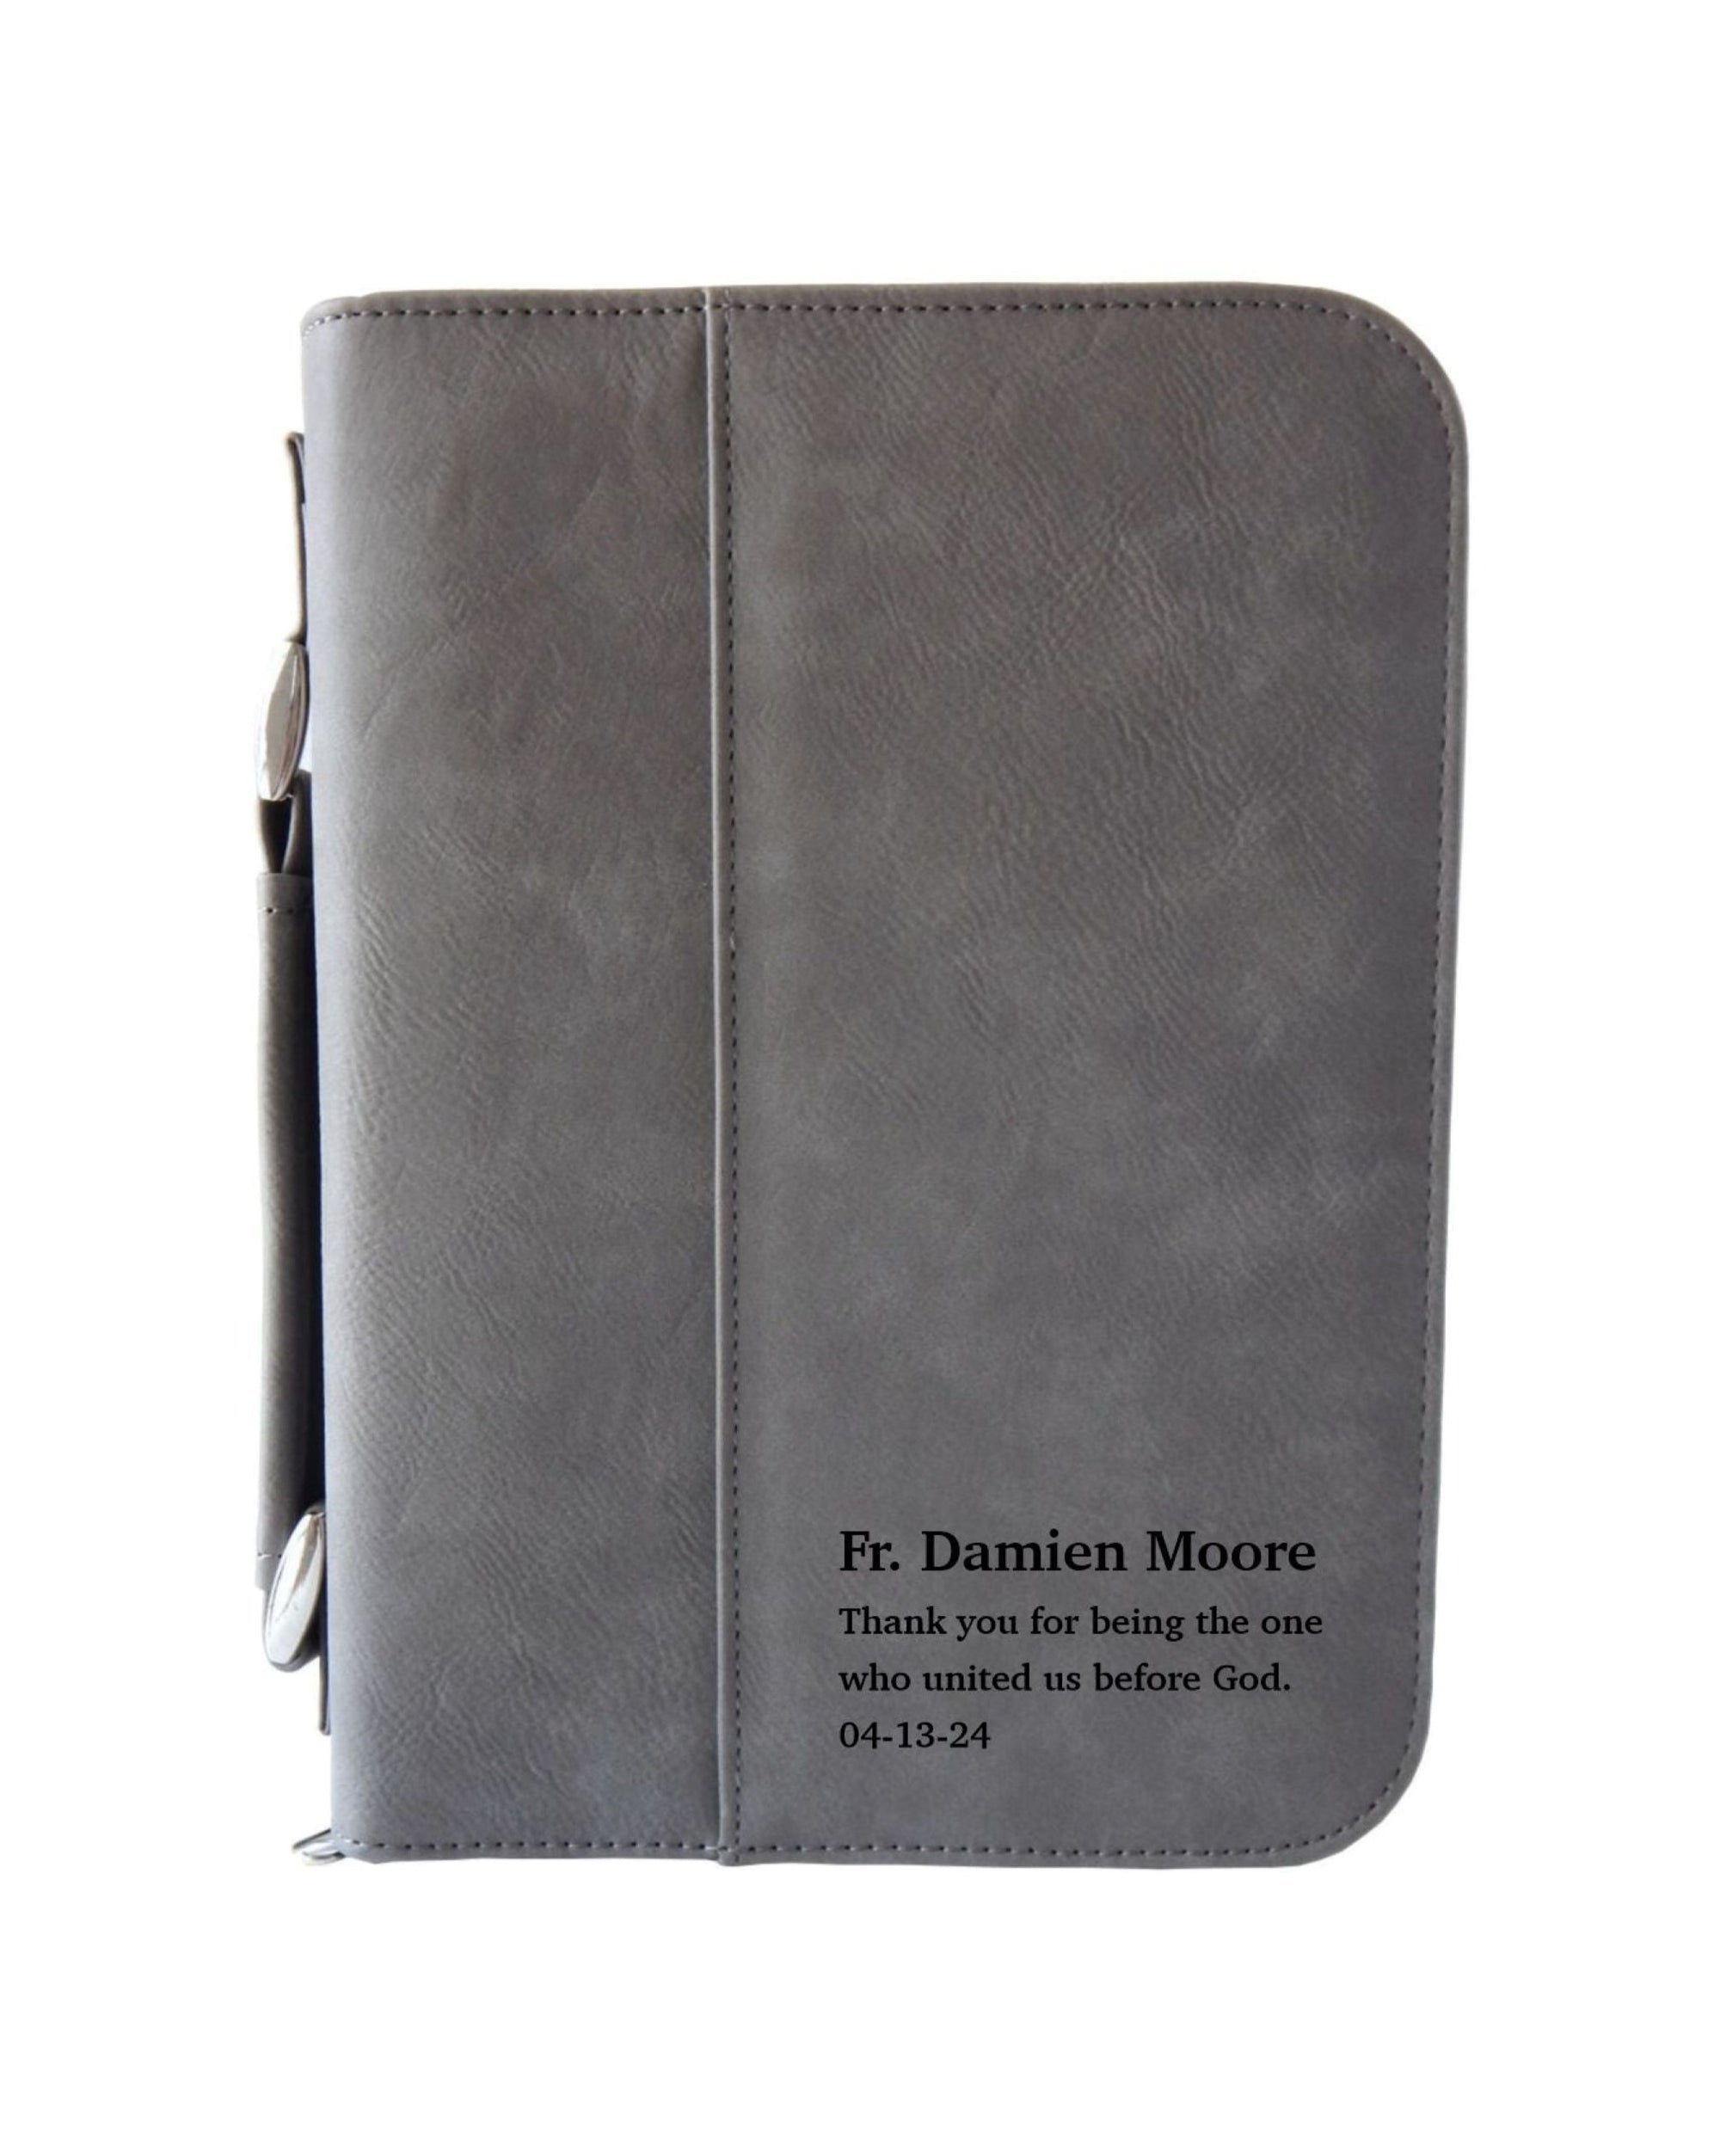 Catholic Priest Gift | Wedding Officiant Gift | Personalized Bible Cover